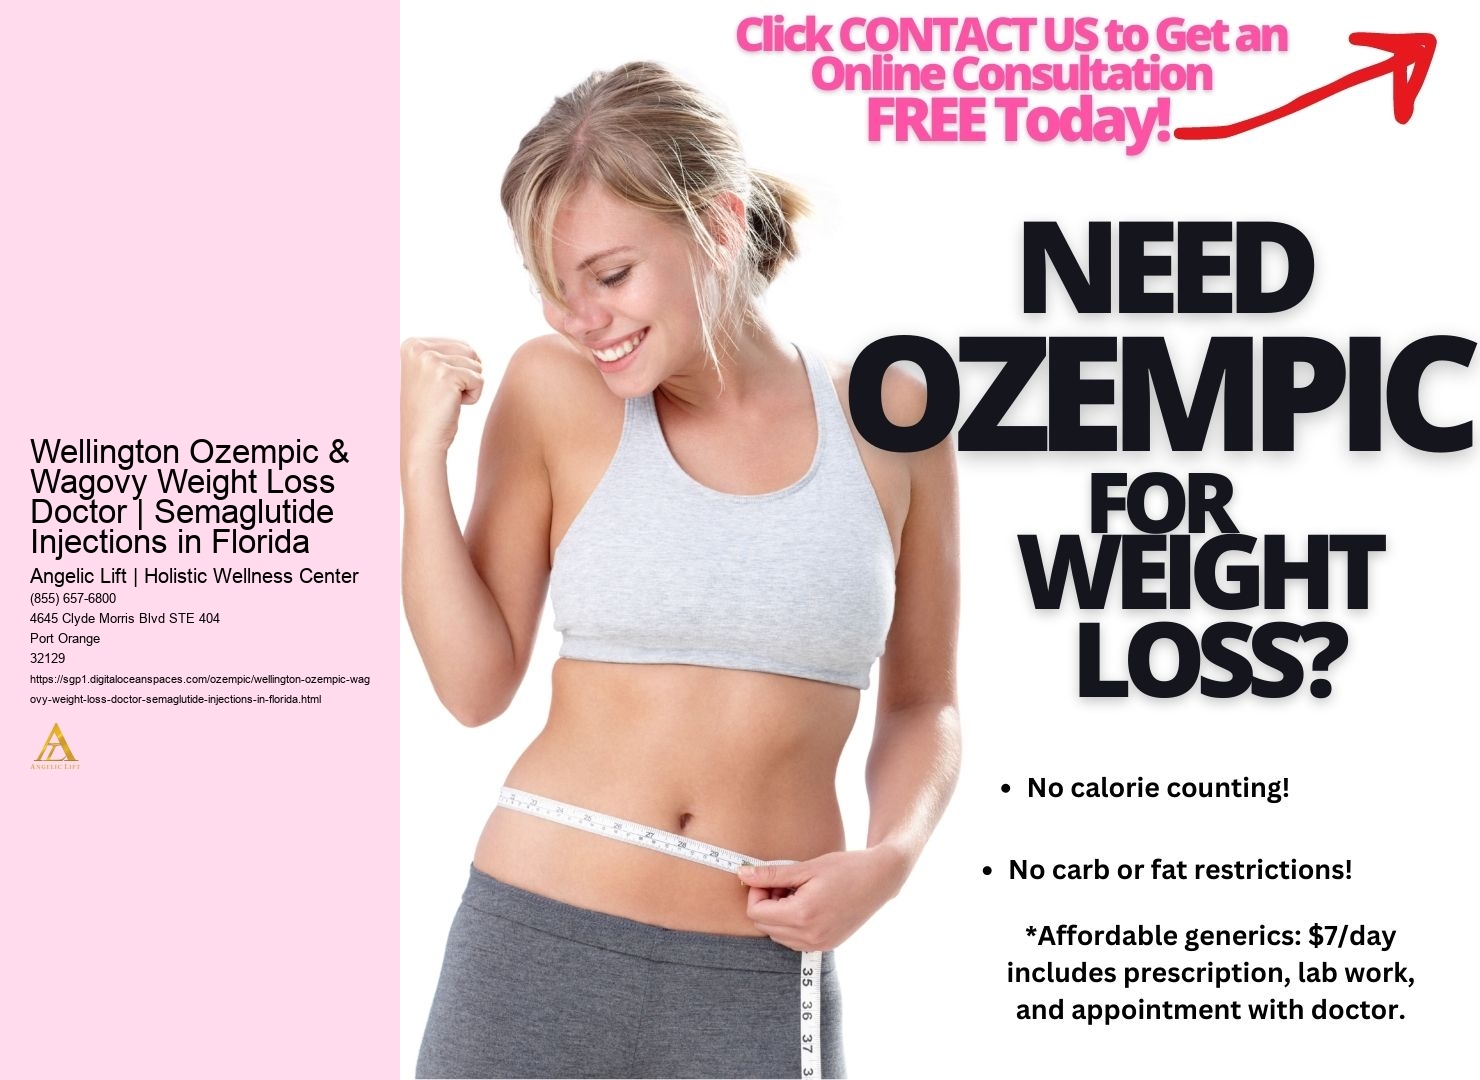 Wellington Ozempic & Wagovy Weight Loss Doctor | Semaglutide Injections in Florida